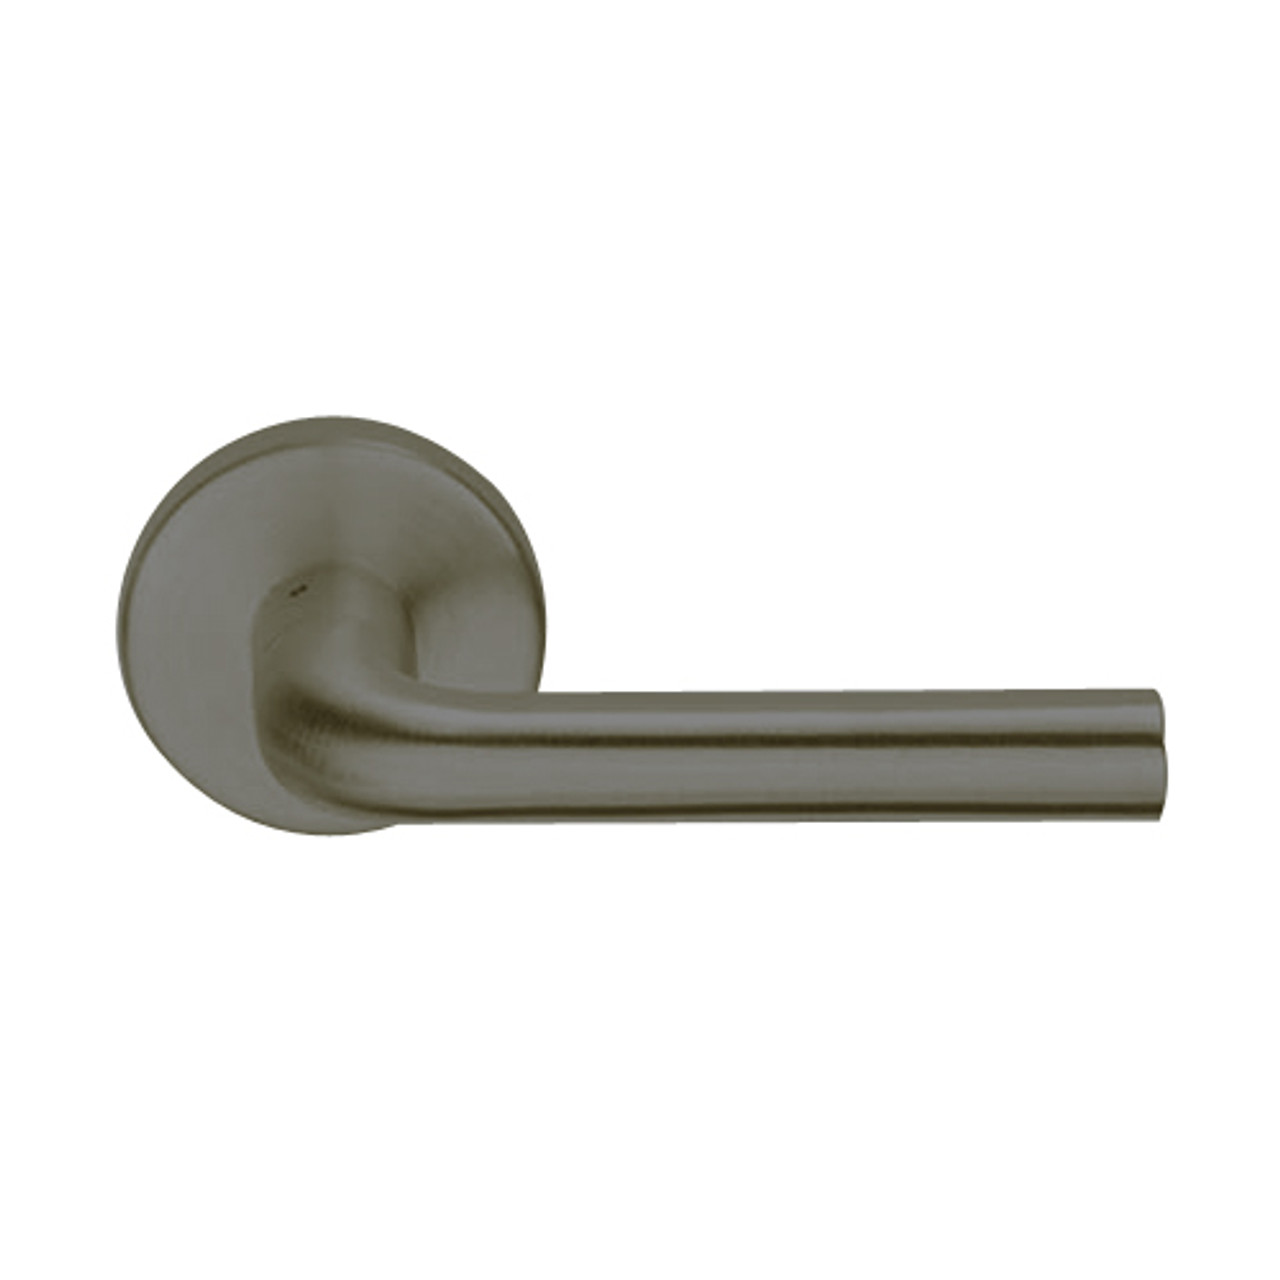 L9082R-02B-613 Schlage L Series Institution Commercial Mortise Lock with 02 Cast Lever Design and Full Size Core in Oil Rubbed Bronze